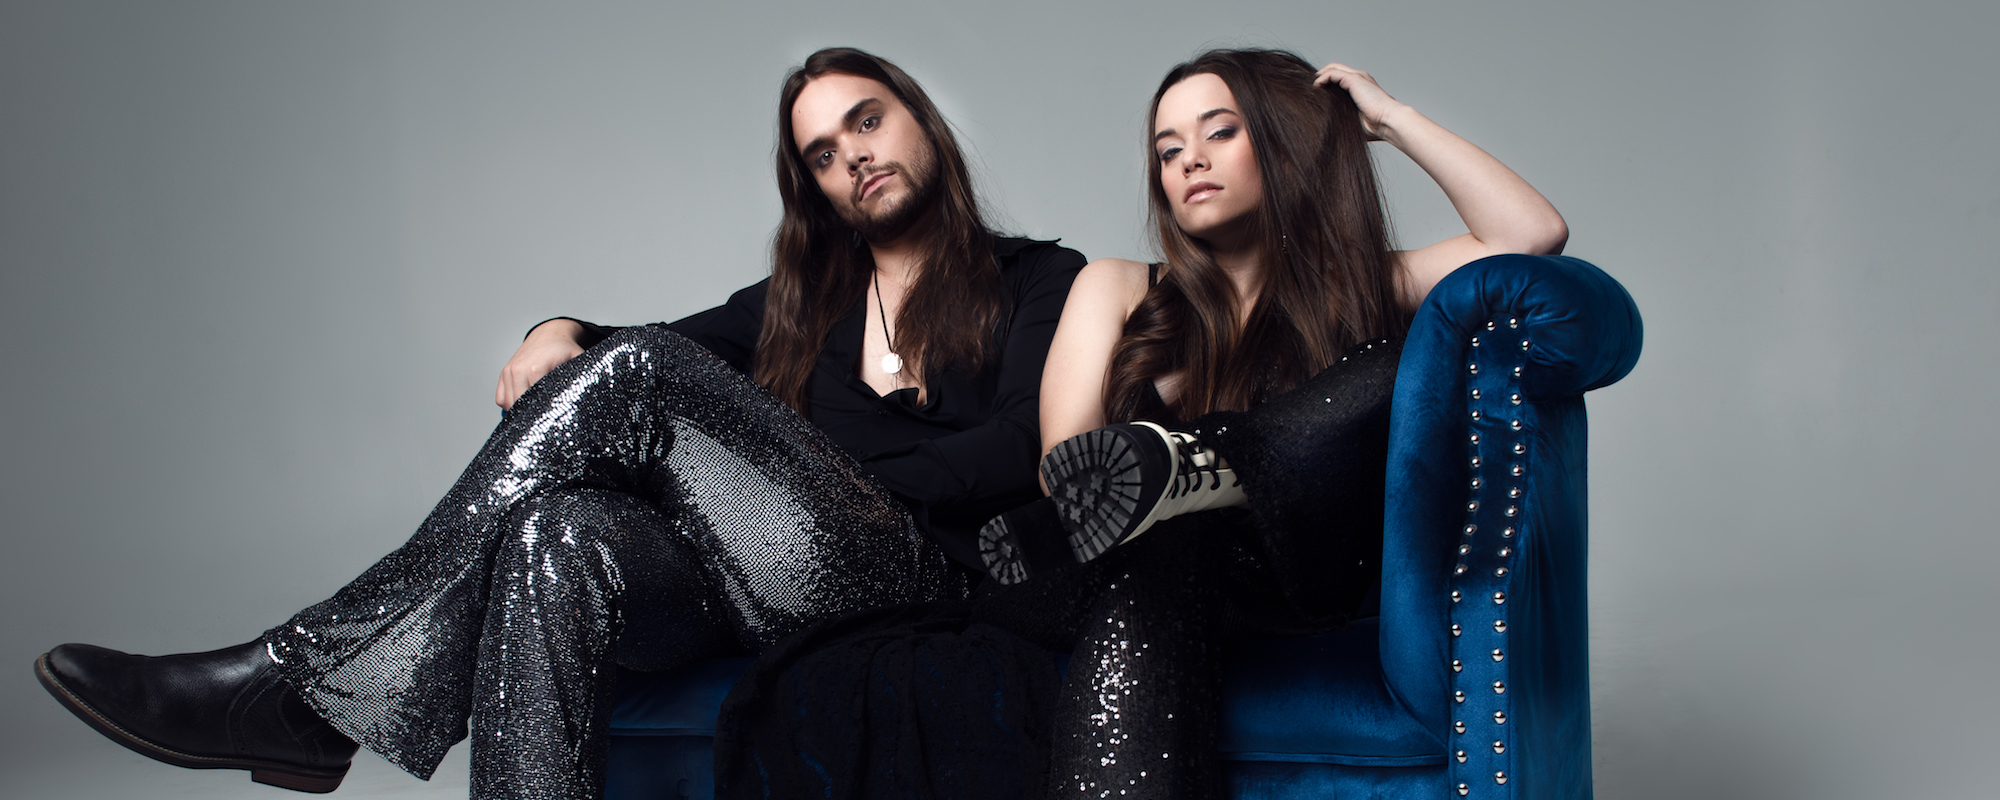 Exclusive Premiere: Jocelyn and Chris Get the ‘Bruises’ of Love on “Black and Blue”